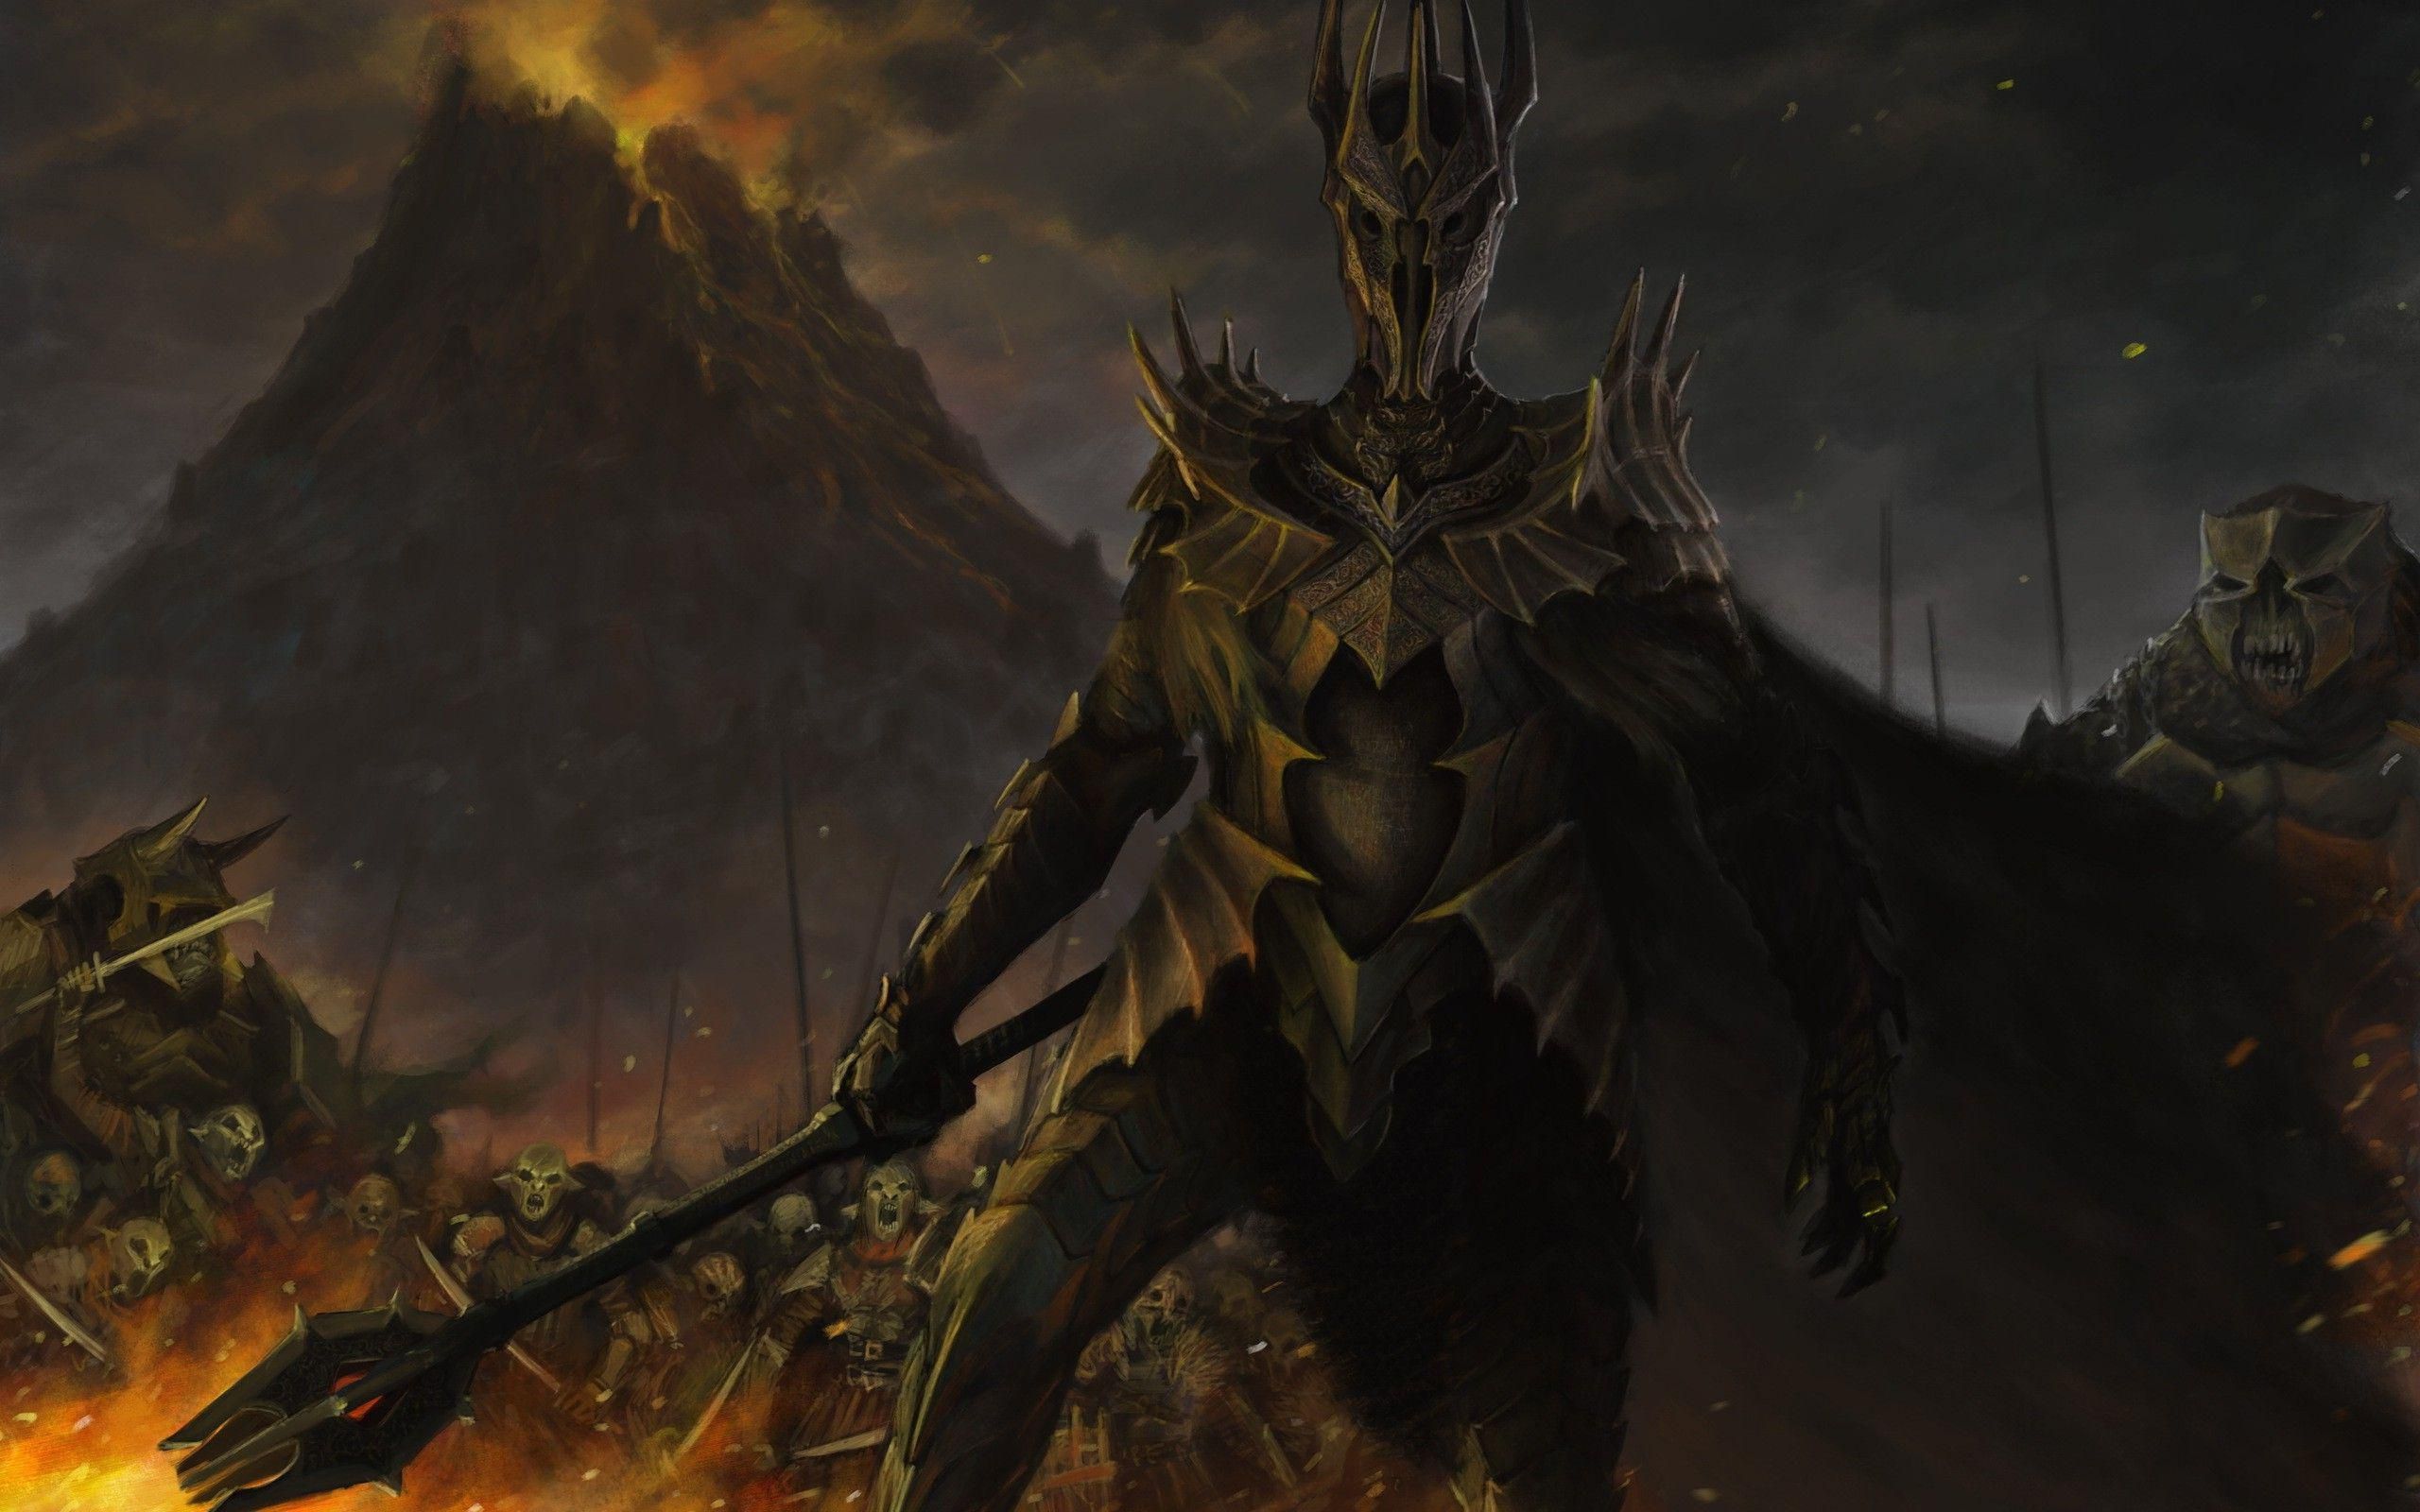 Sauron - The Lord of the Rings >> HD Wallpaper, get it now!